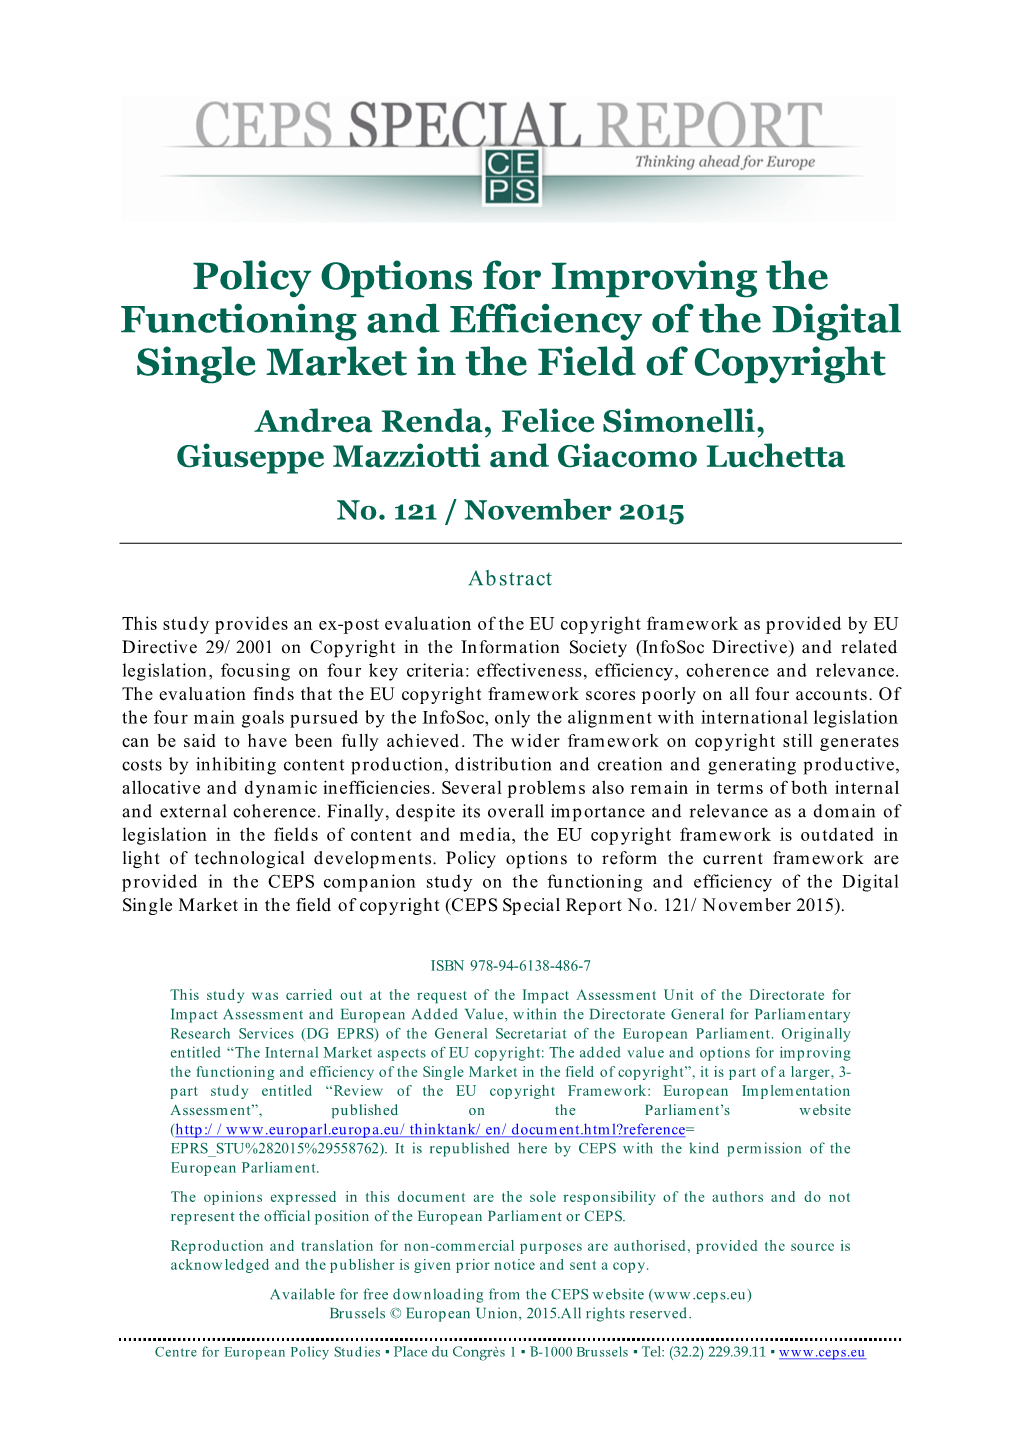 Policy Options for Improving the Functioning and Efficiency of The